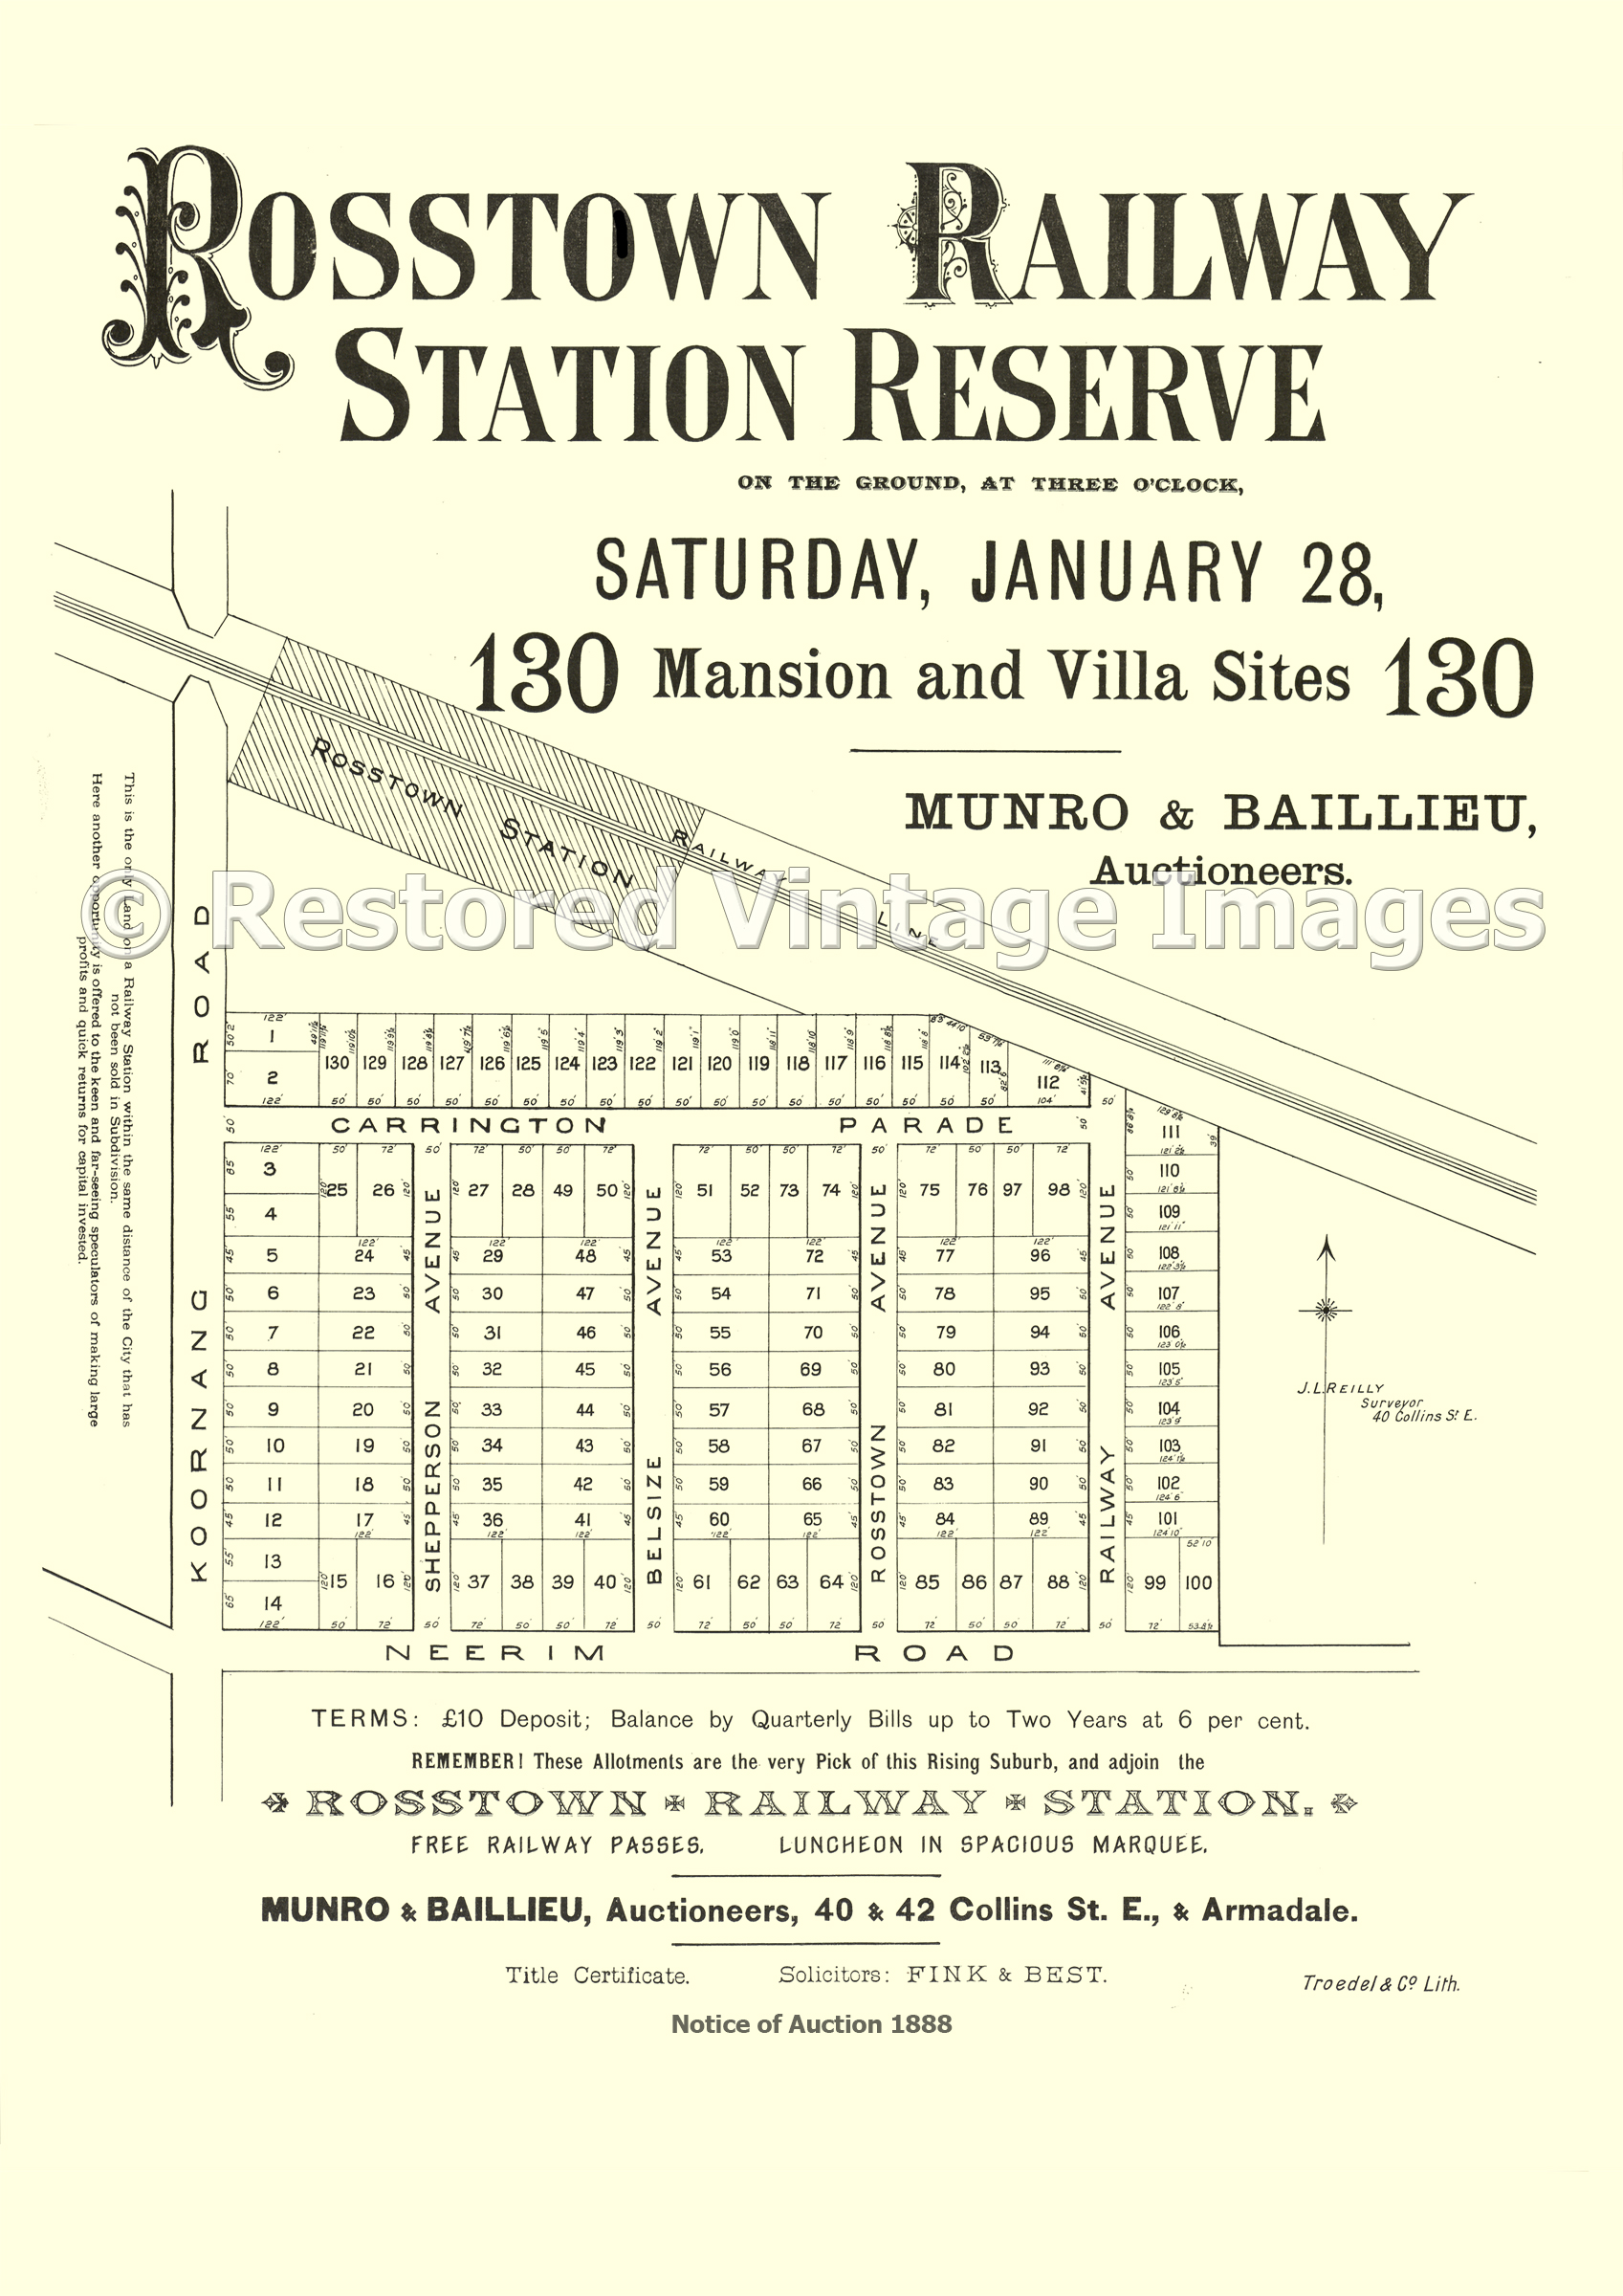 Rosstown Railway Station Reserve 28th January 1888 – Carnegie